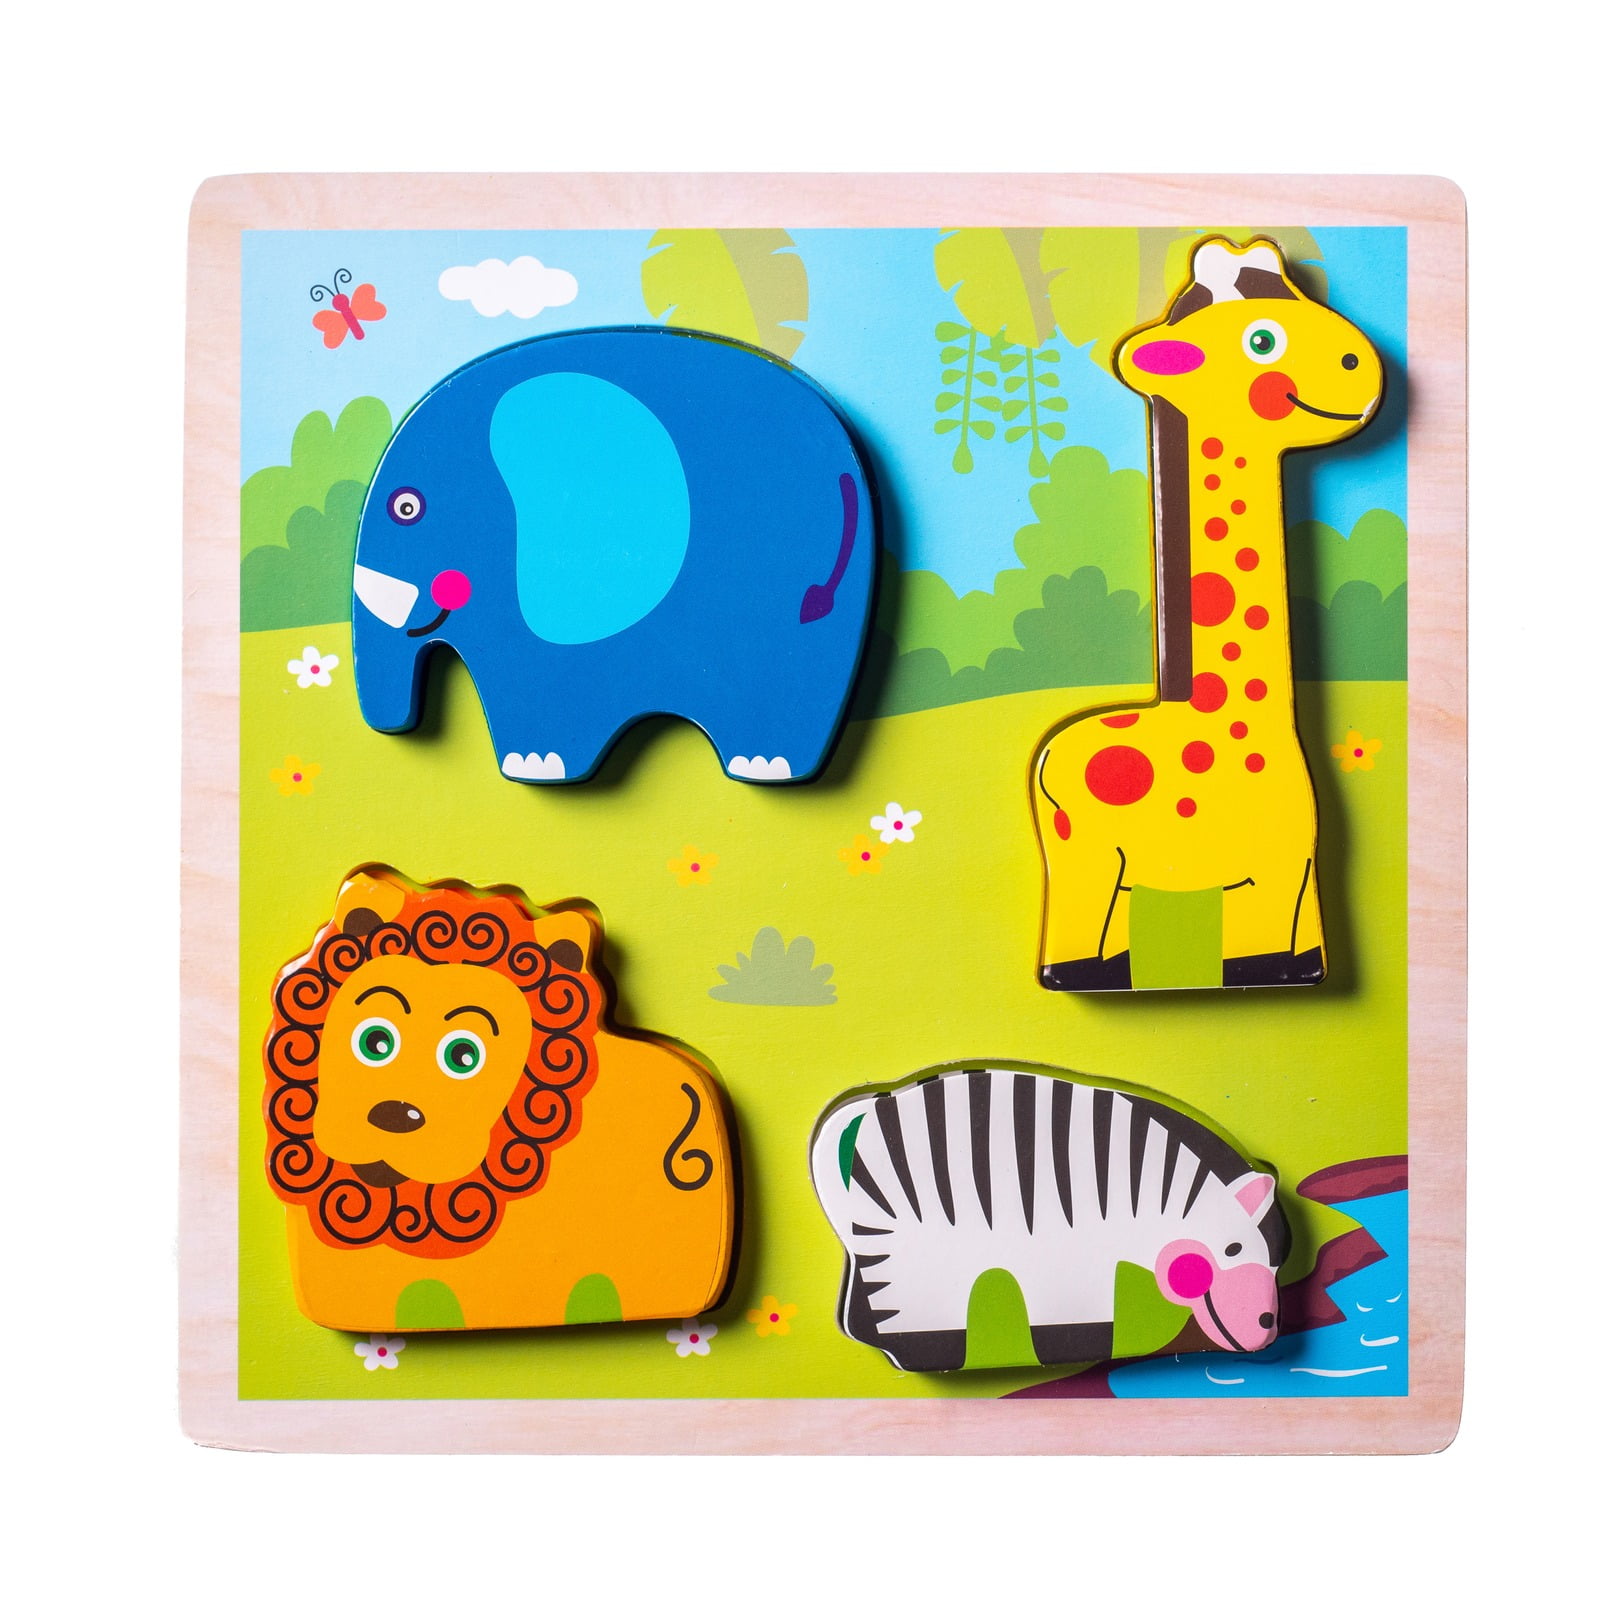 Eliiti Wooden Safari Animals Puzzle for Toddlers 2 to 4 Years Old Boys Girls Toy 